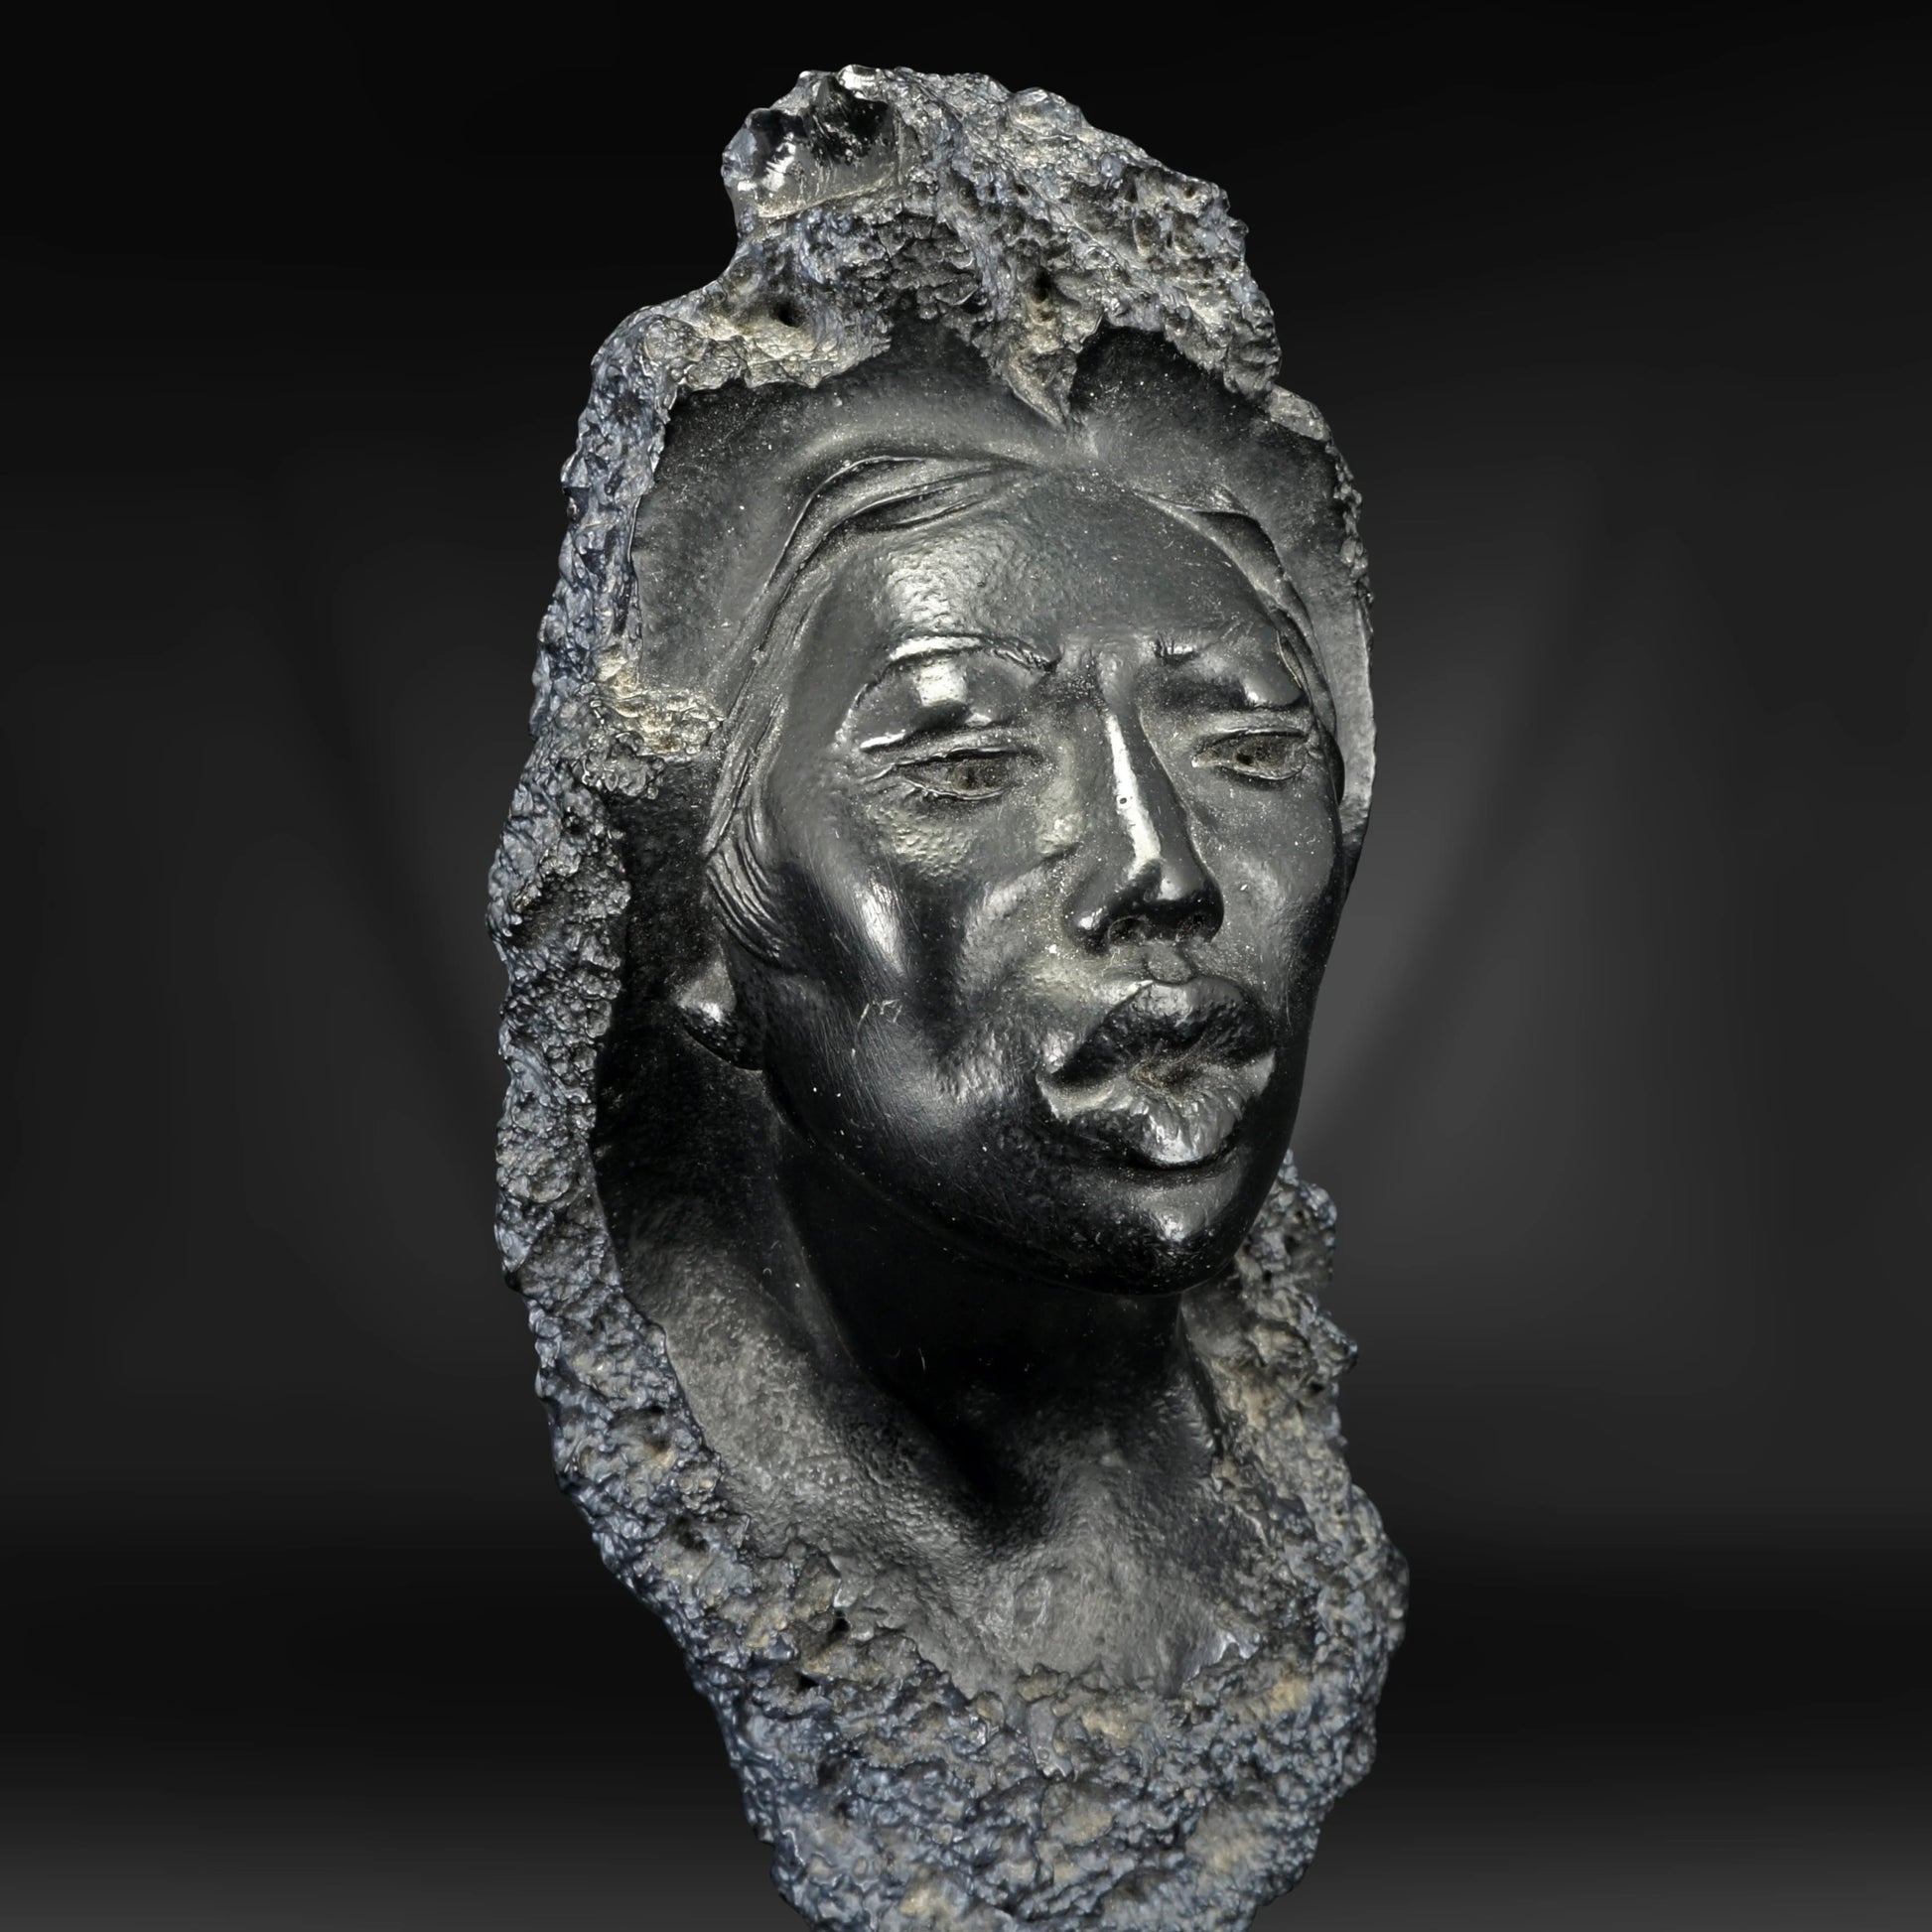 Coco Joe Lava Hawaii Bust of Woman 1964 - Bear and Raven Antiques